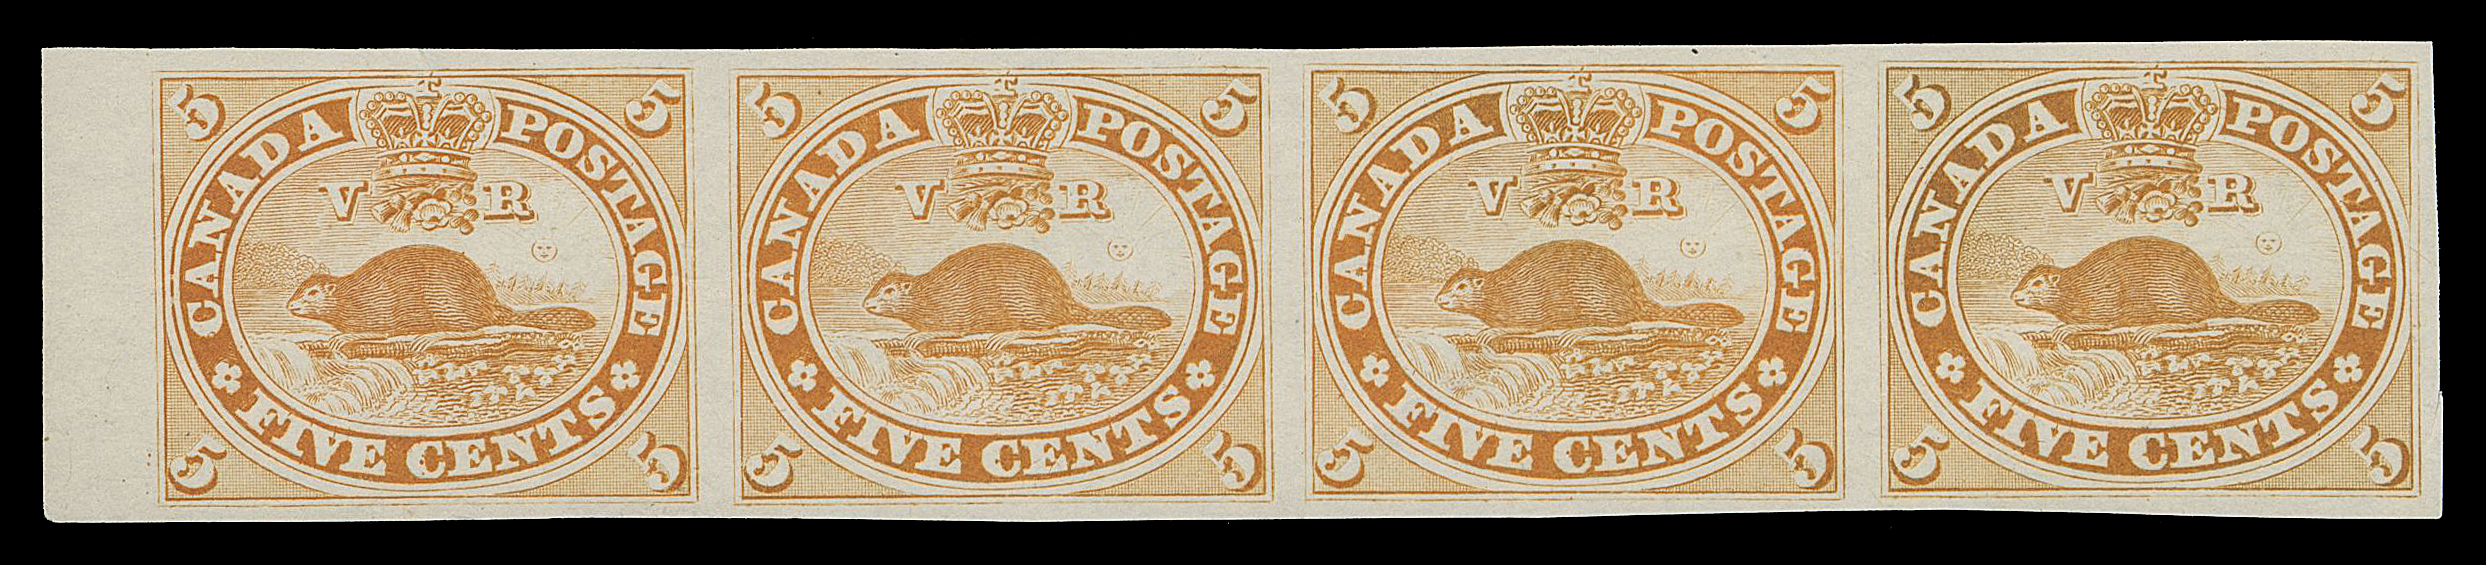 THREE PENCE AND FIVE CENTS  15TCviii,Trial colour plate proof strip of four in orange yellow on india, sheet margin at left, tiny scissor cut in margin at right, otherwise sound, a scarce multiple, VF